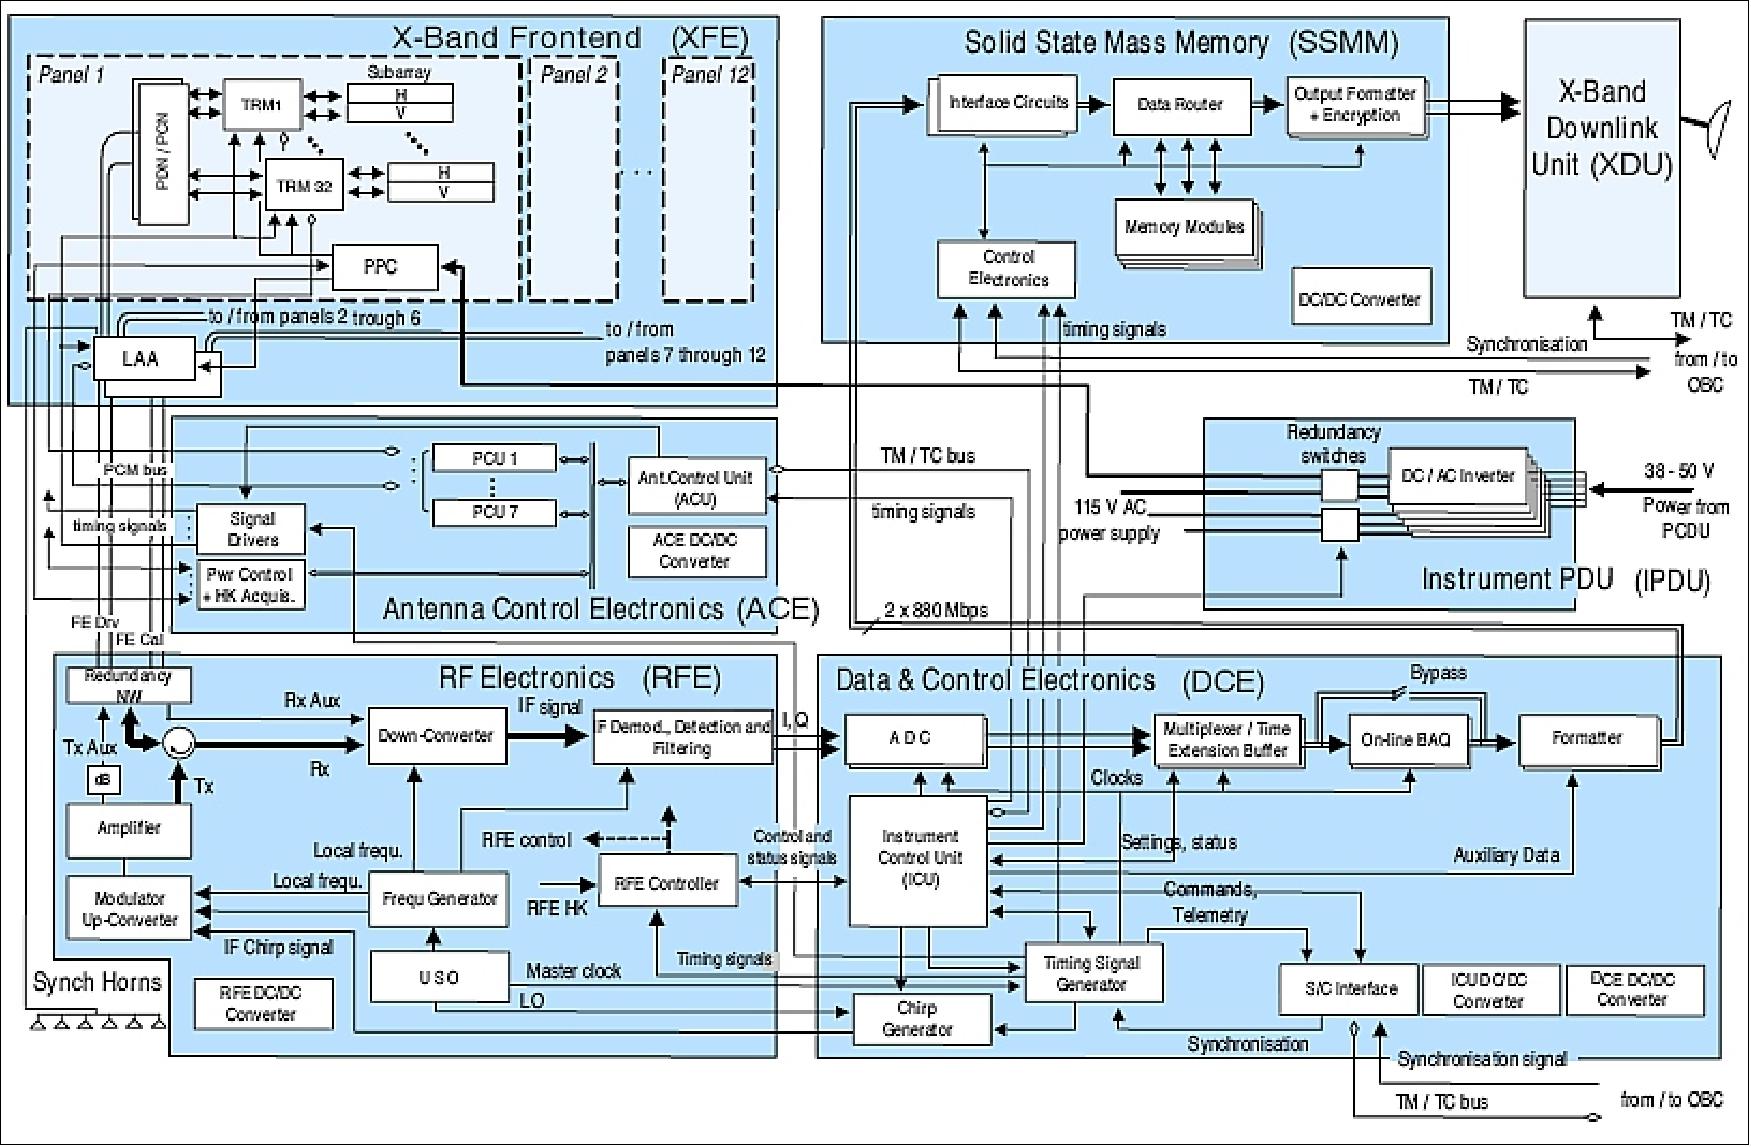 Figure 52: Functional block diagram of the TSX-SAR instrument (image credit: DLR, EADS) 98)